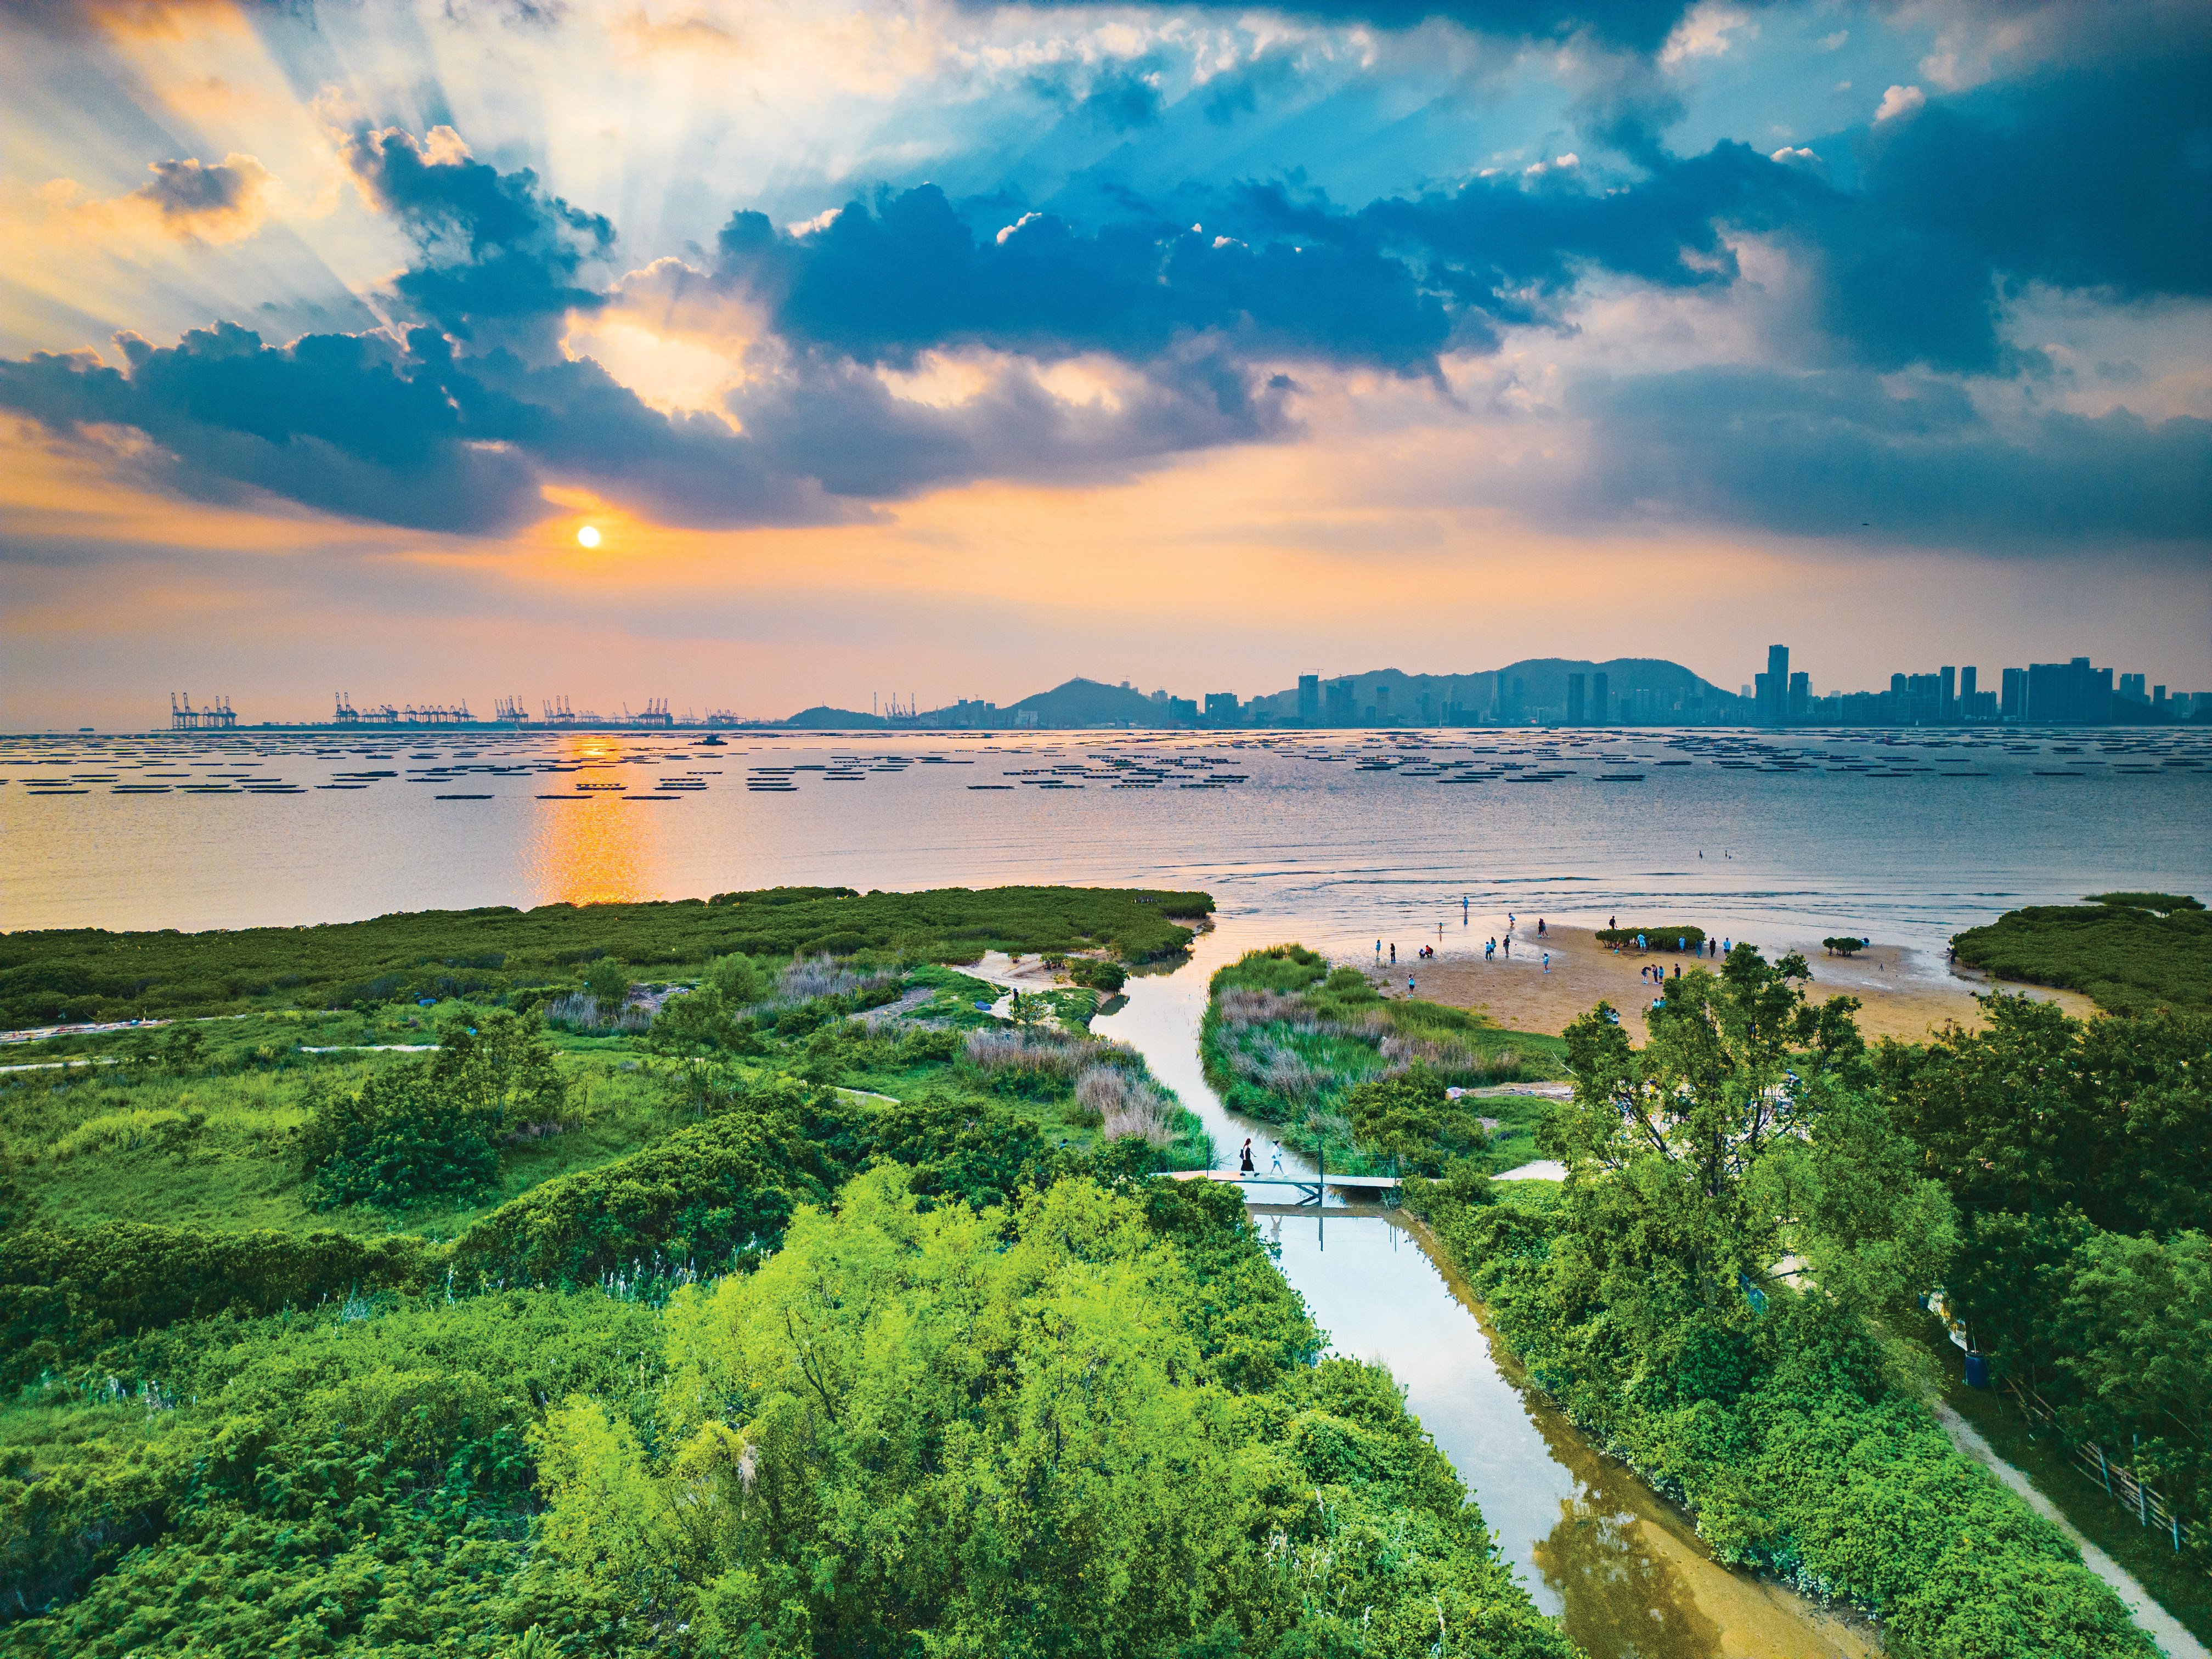 A dramatic sunset above Pak Nai in Hong Kong’s northwestern New Territories, looking out across Deep Bay towards the mainland Chinese city of Shenzhen.
